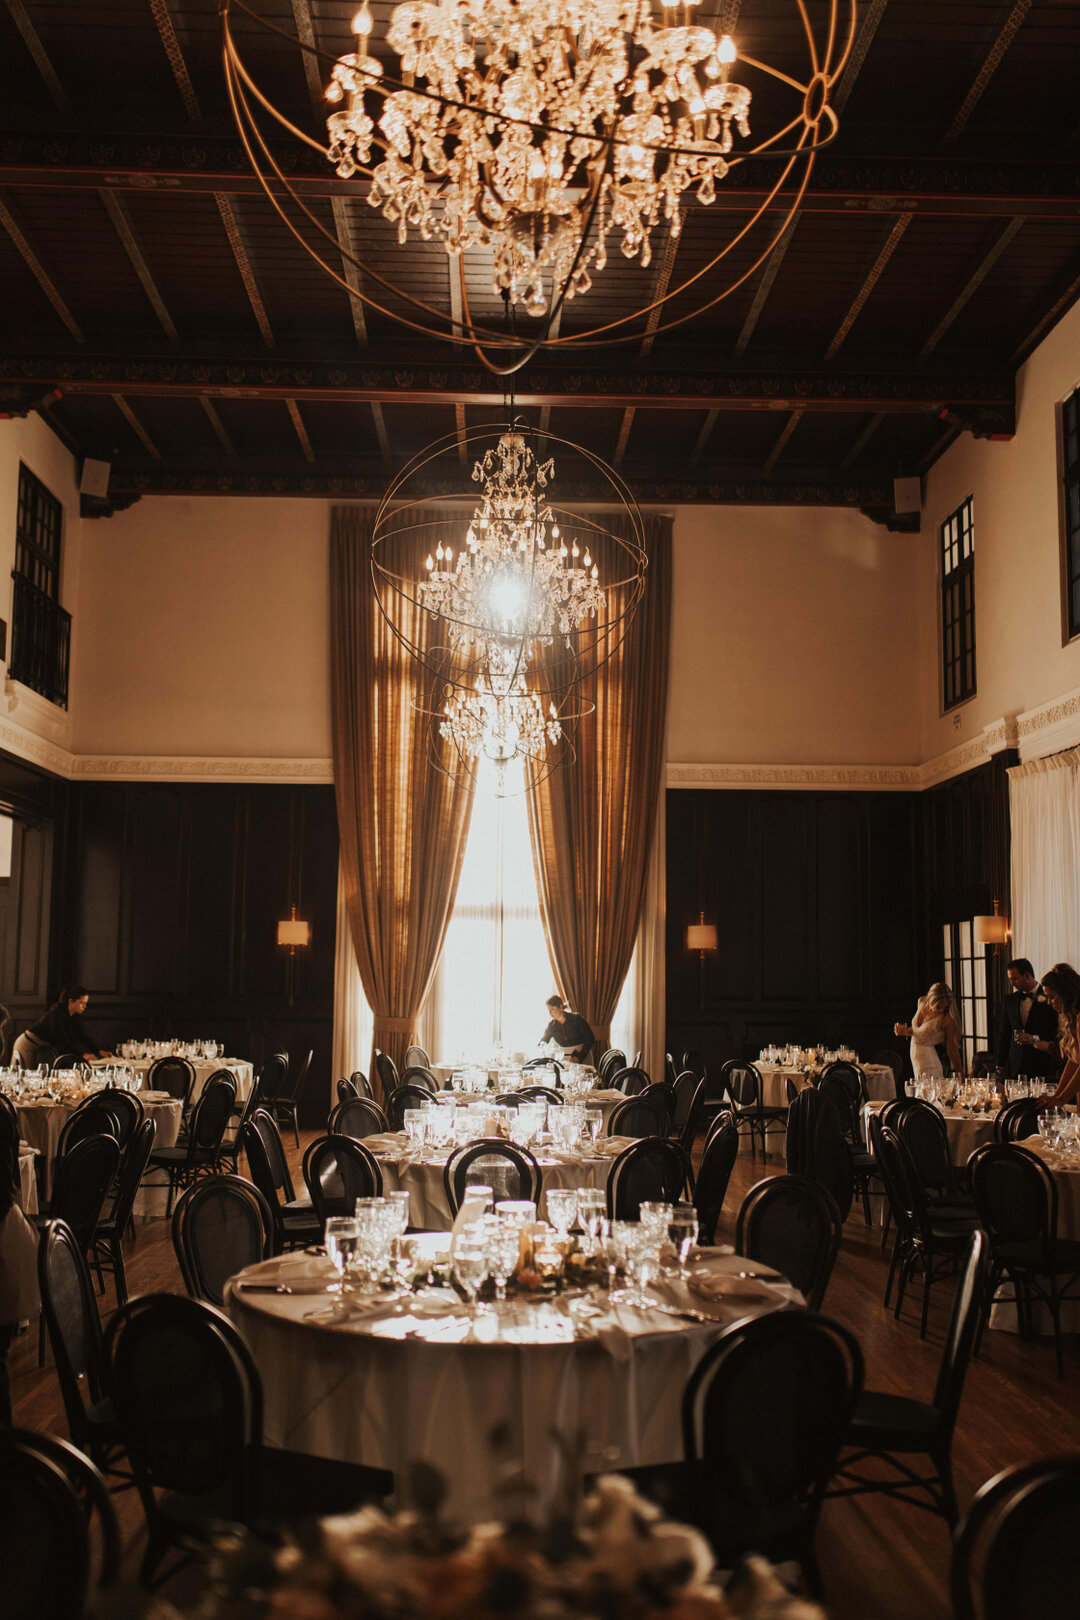 Creating memories in a grand setting, where elegance meets history from Alexa &amp; Sean's special day💒 

Wedding Coordination @taylordeckerevents 
Venue @ebelloflb 
Catering &amp; Bar @treslacatering 
Photo @nicolekirshnerphotography 
DJ @realjackf